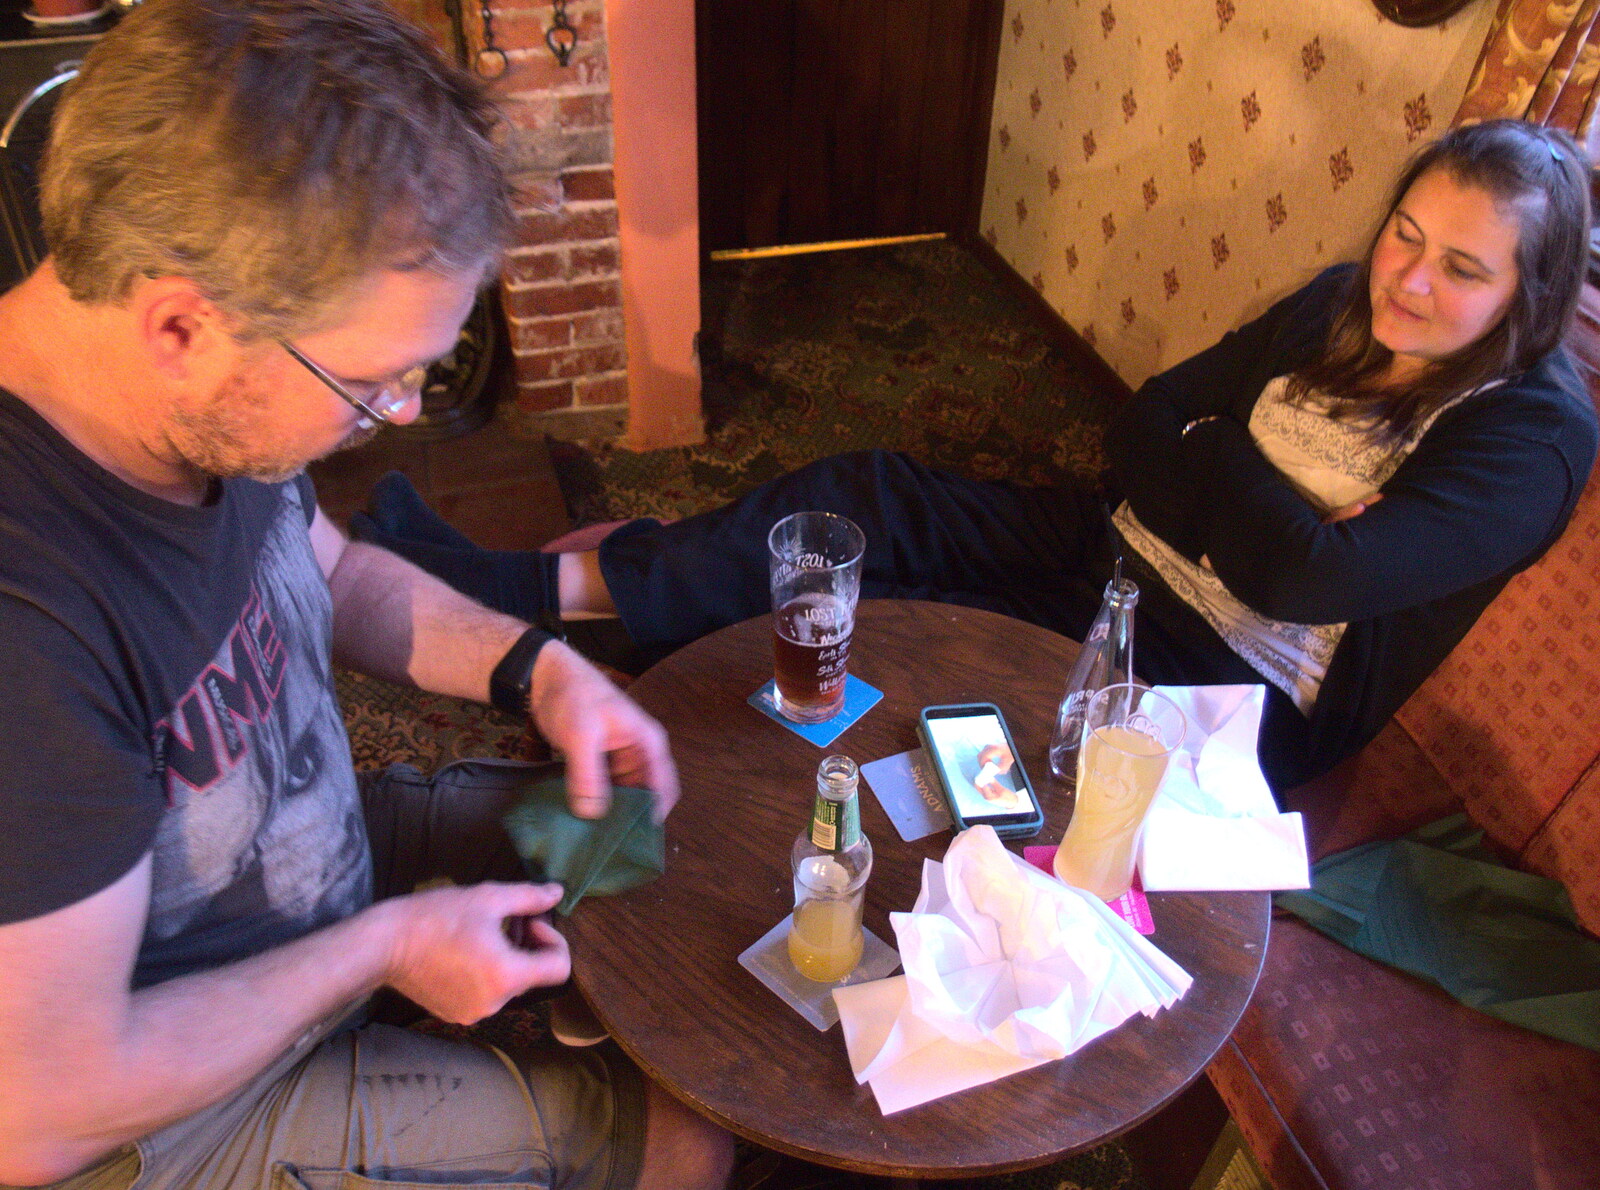 Marc does some napkin folding from The BSCC at the Mellis Railway and The Swan, Brome, Suffolk - 8th June 2017